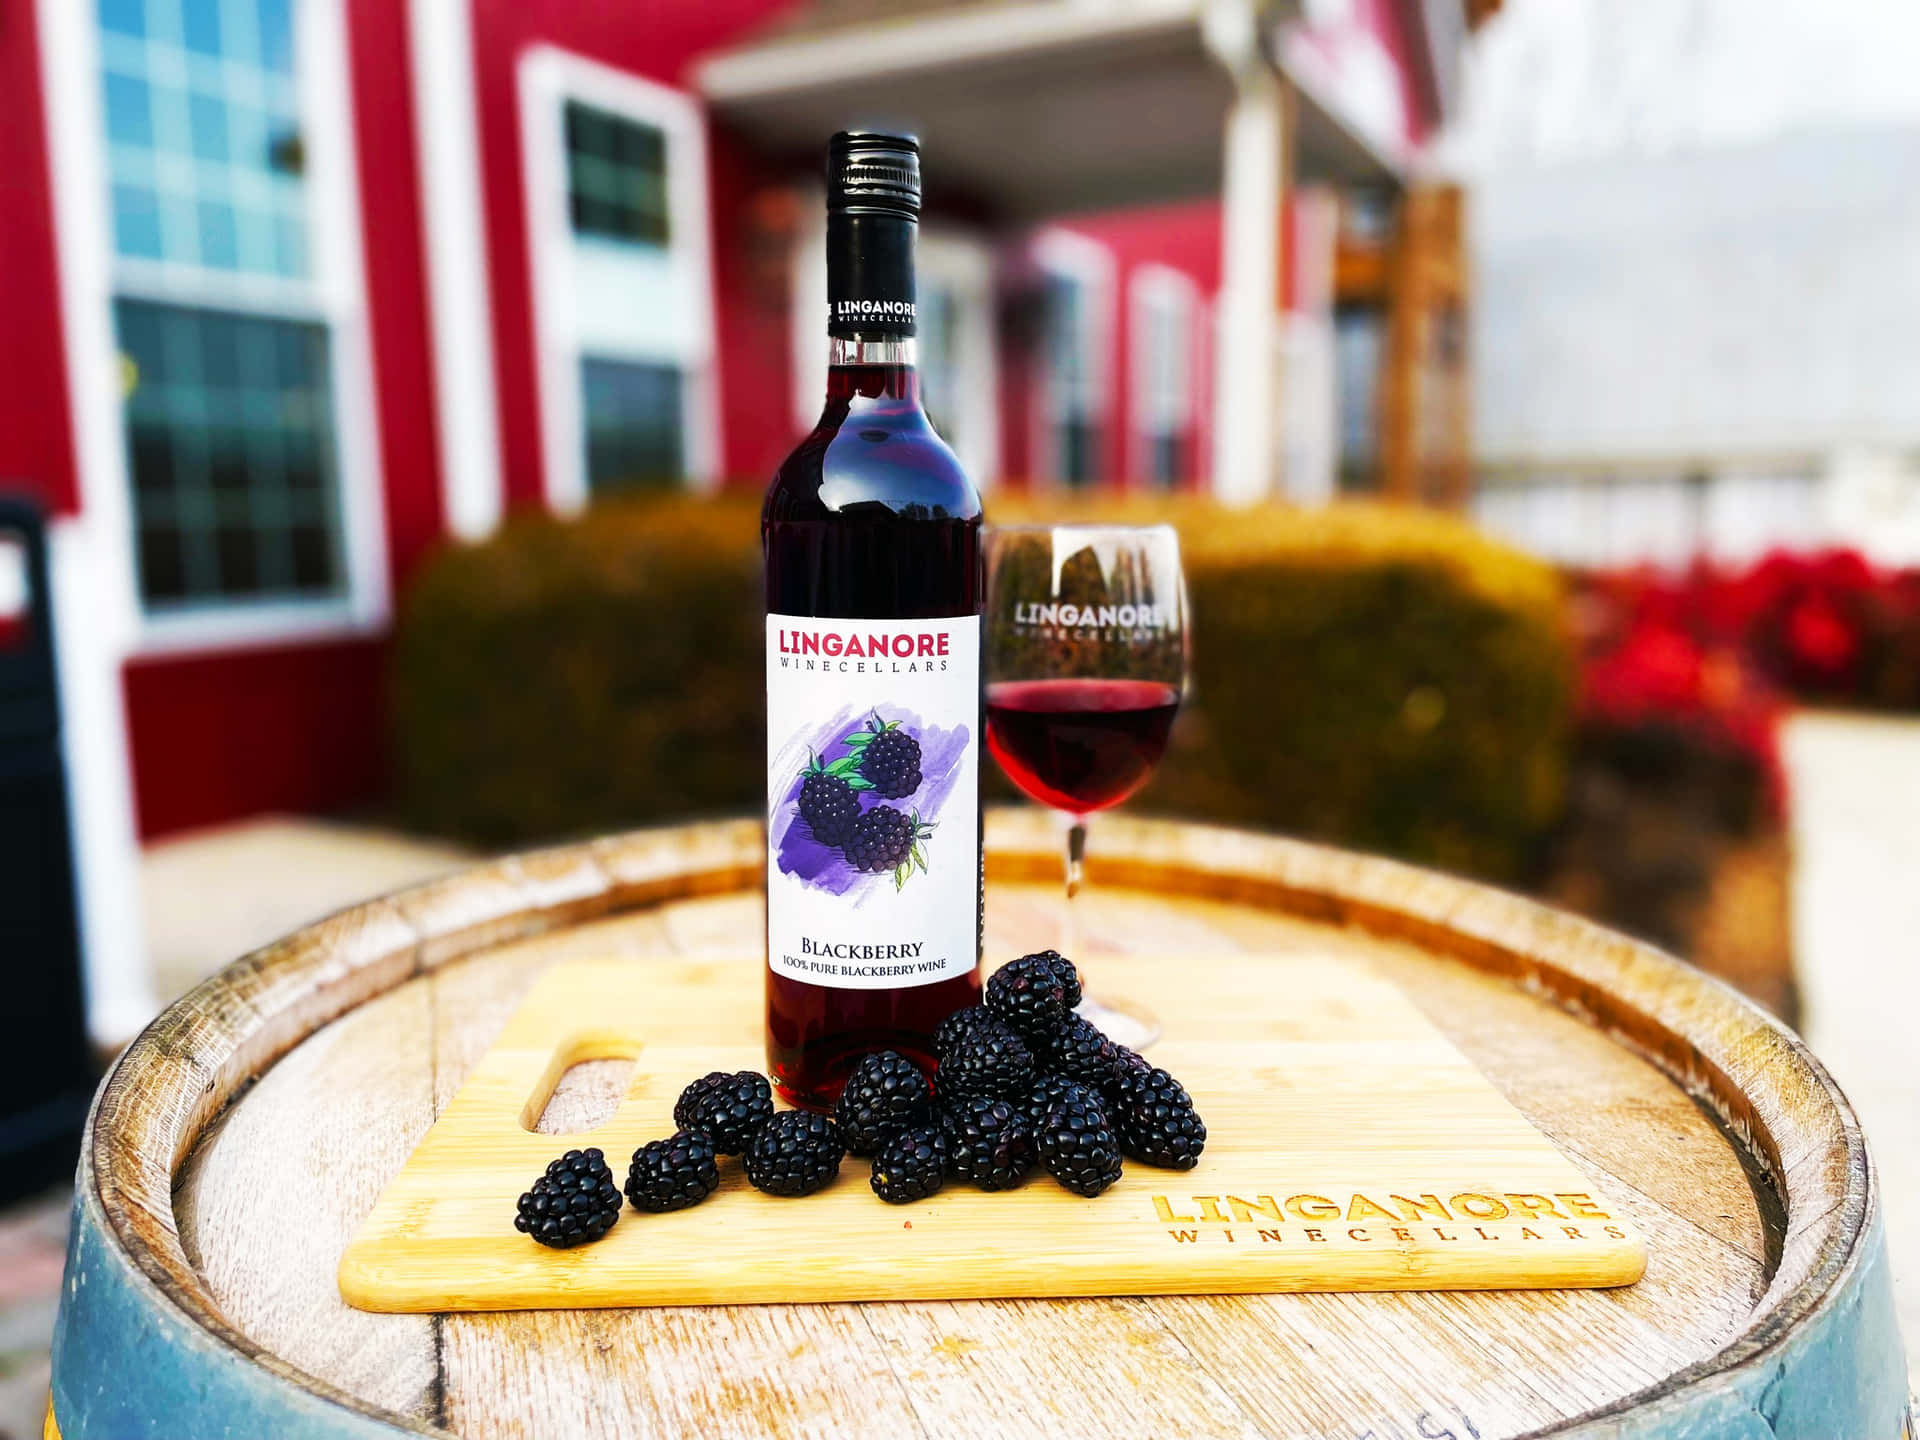 The sweet and tart flavor of blackberry wine.